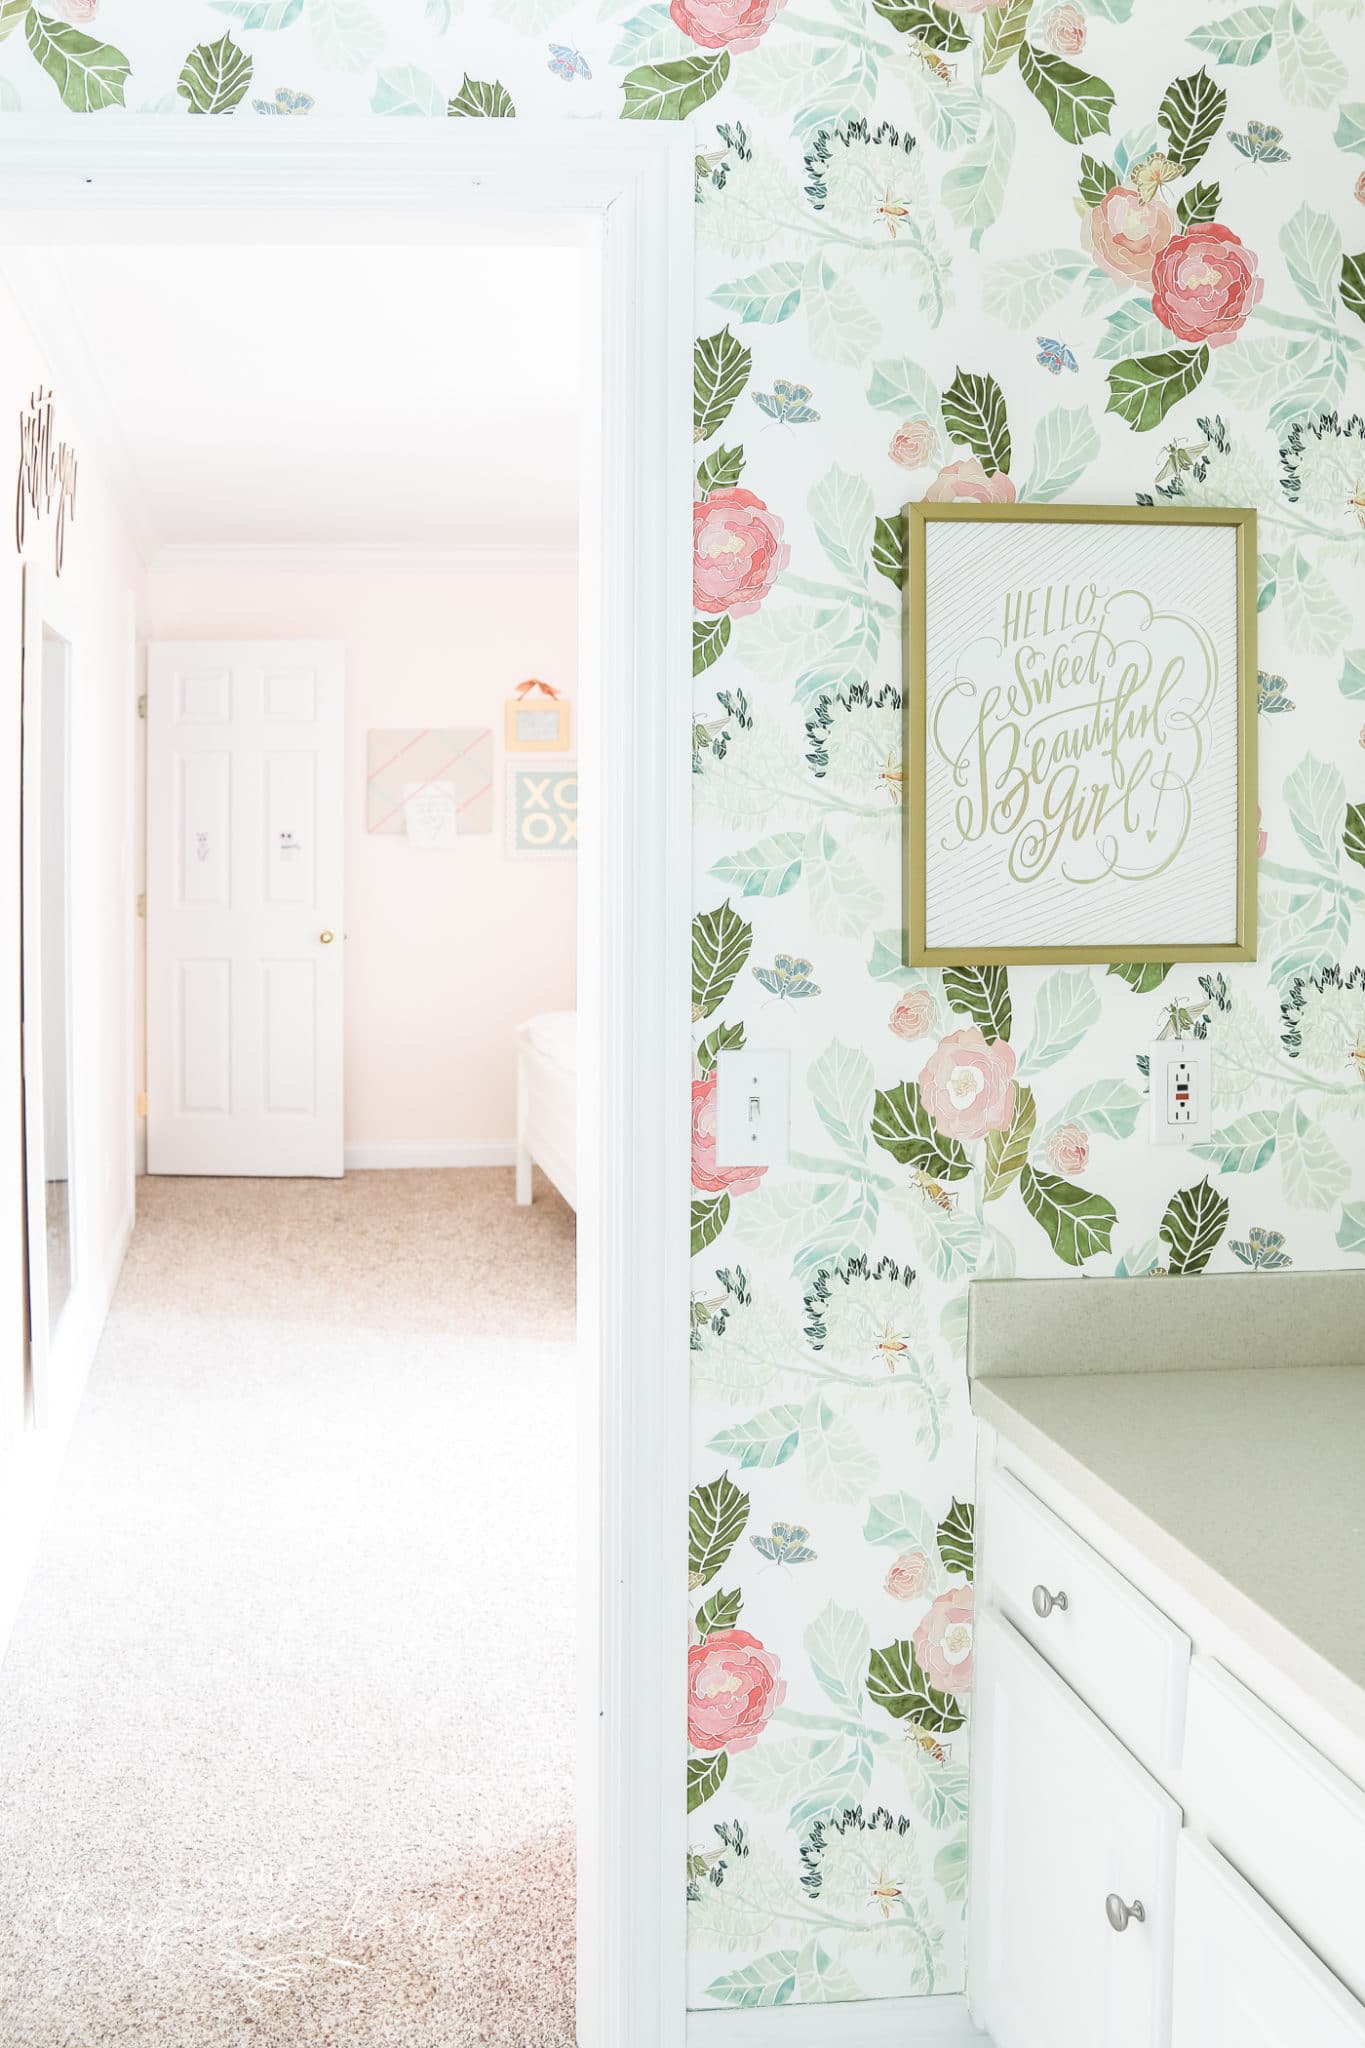 How to Select Wallpaper {Decorating 101}